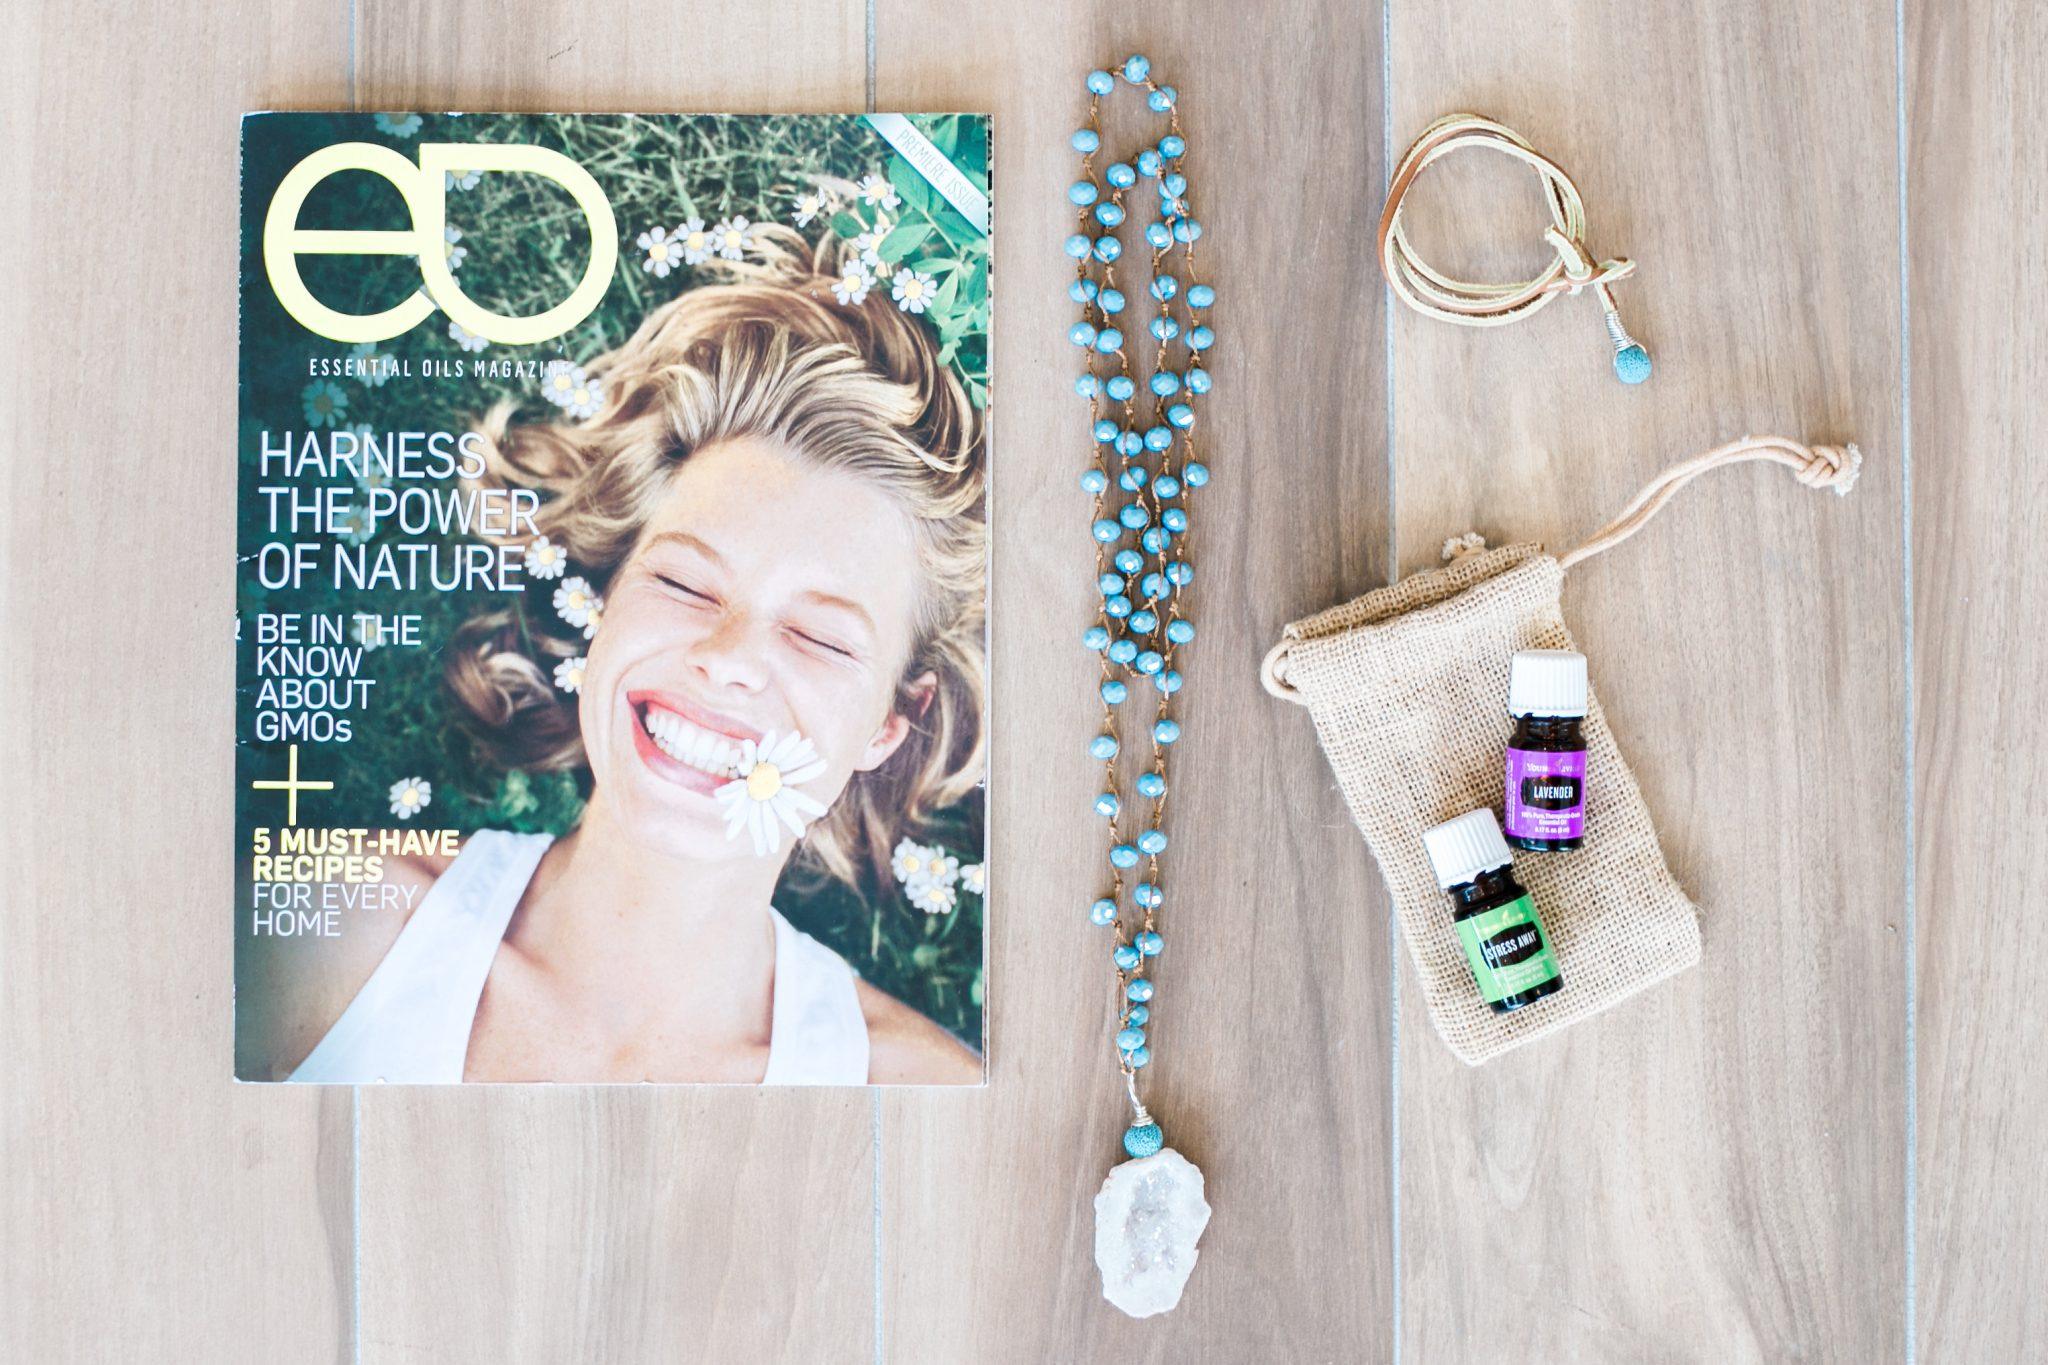 Essential Oils magazine and my favorite oils and diffuser jewelry by @nomadicnewlyweds